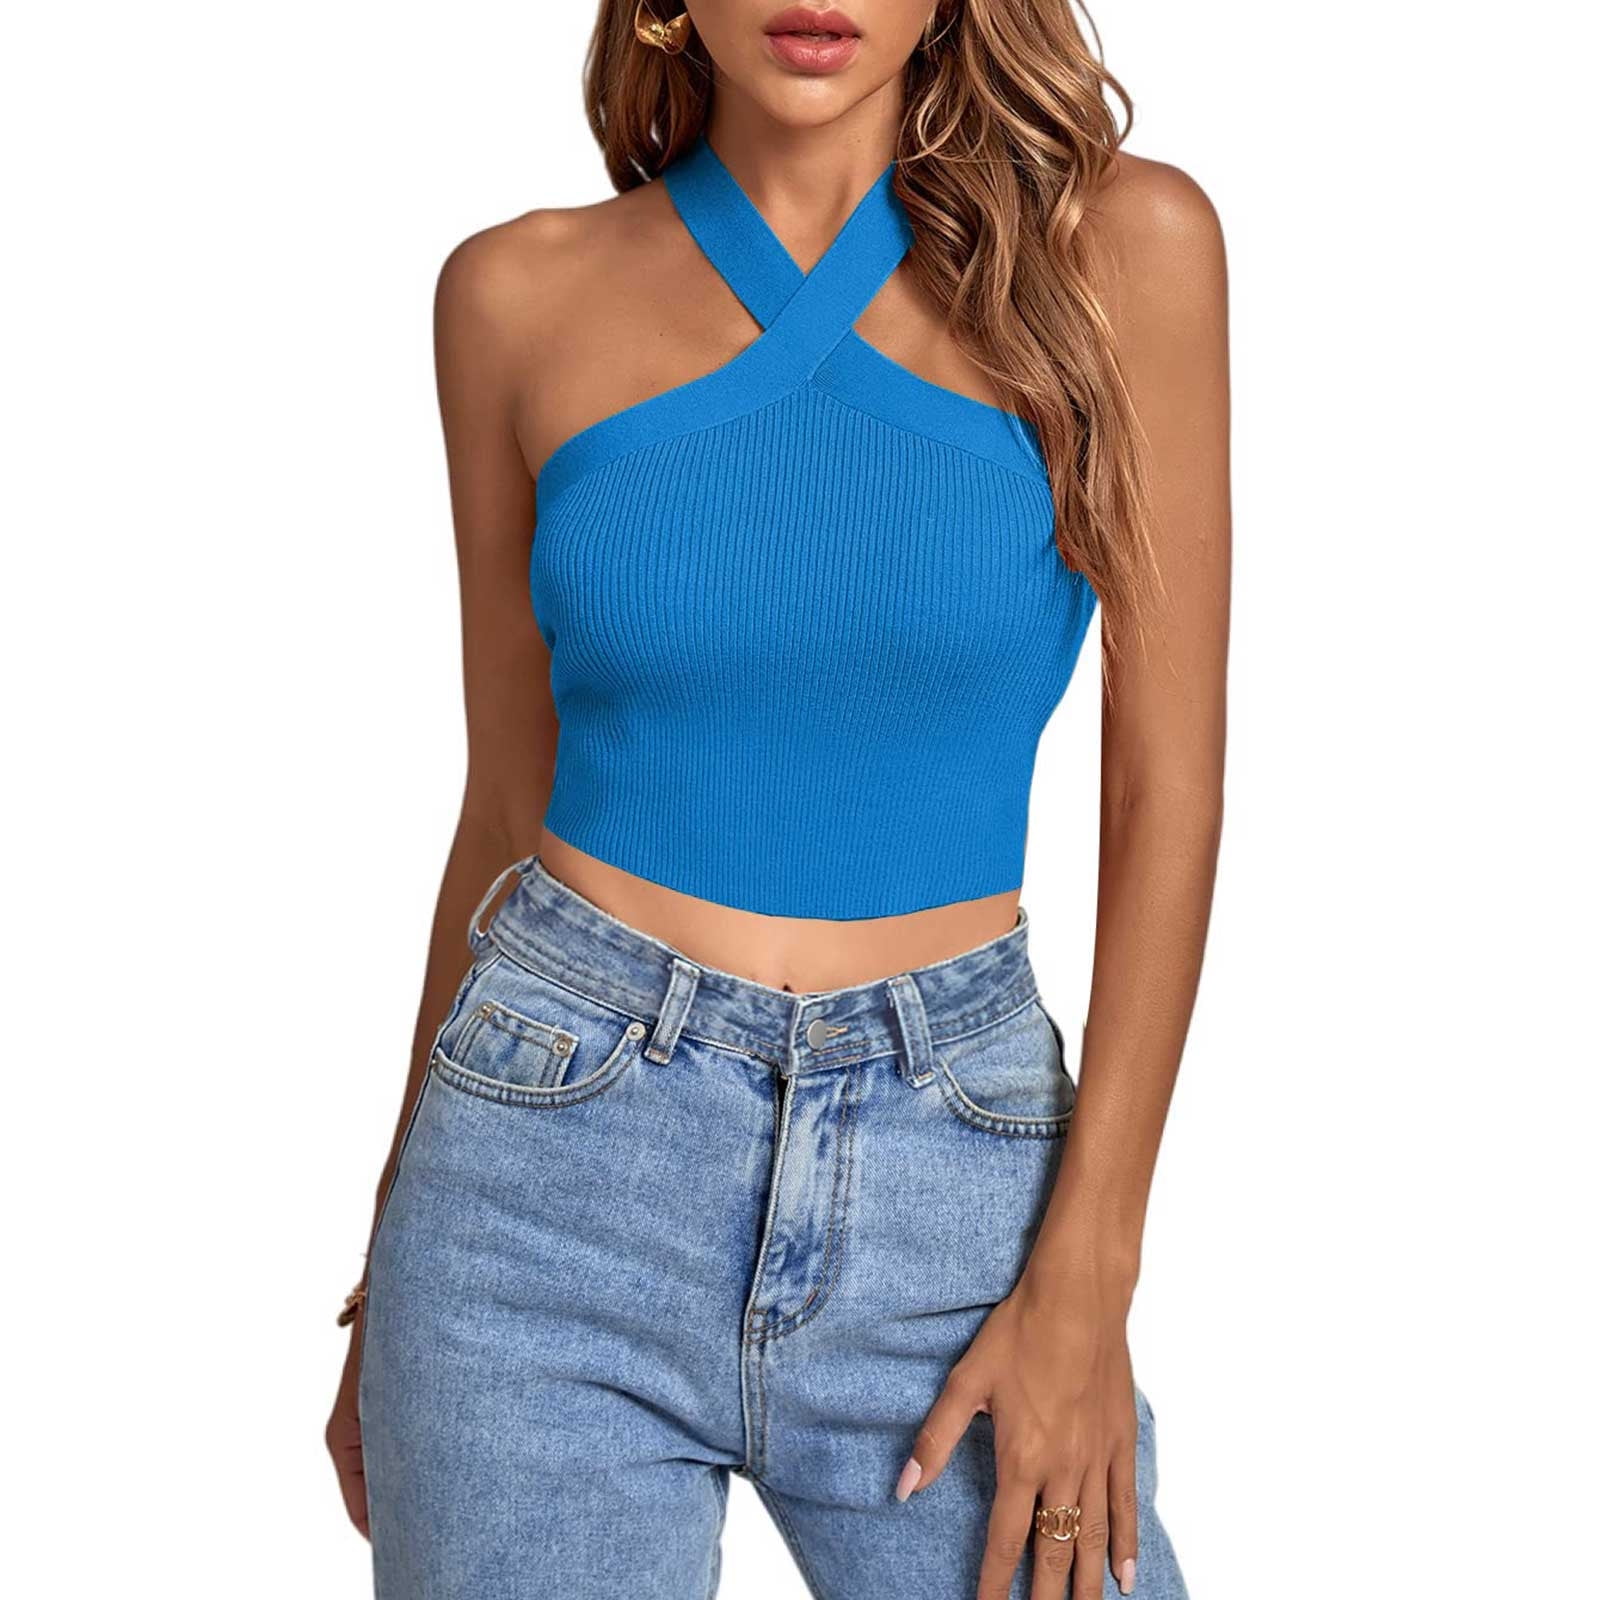 Womens Tank Tops $4.98 Clearance,AXXD Sleeveless Loose Solid Summer Lace  Tank Top Sky Blue 10